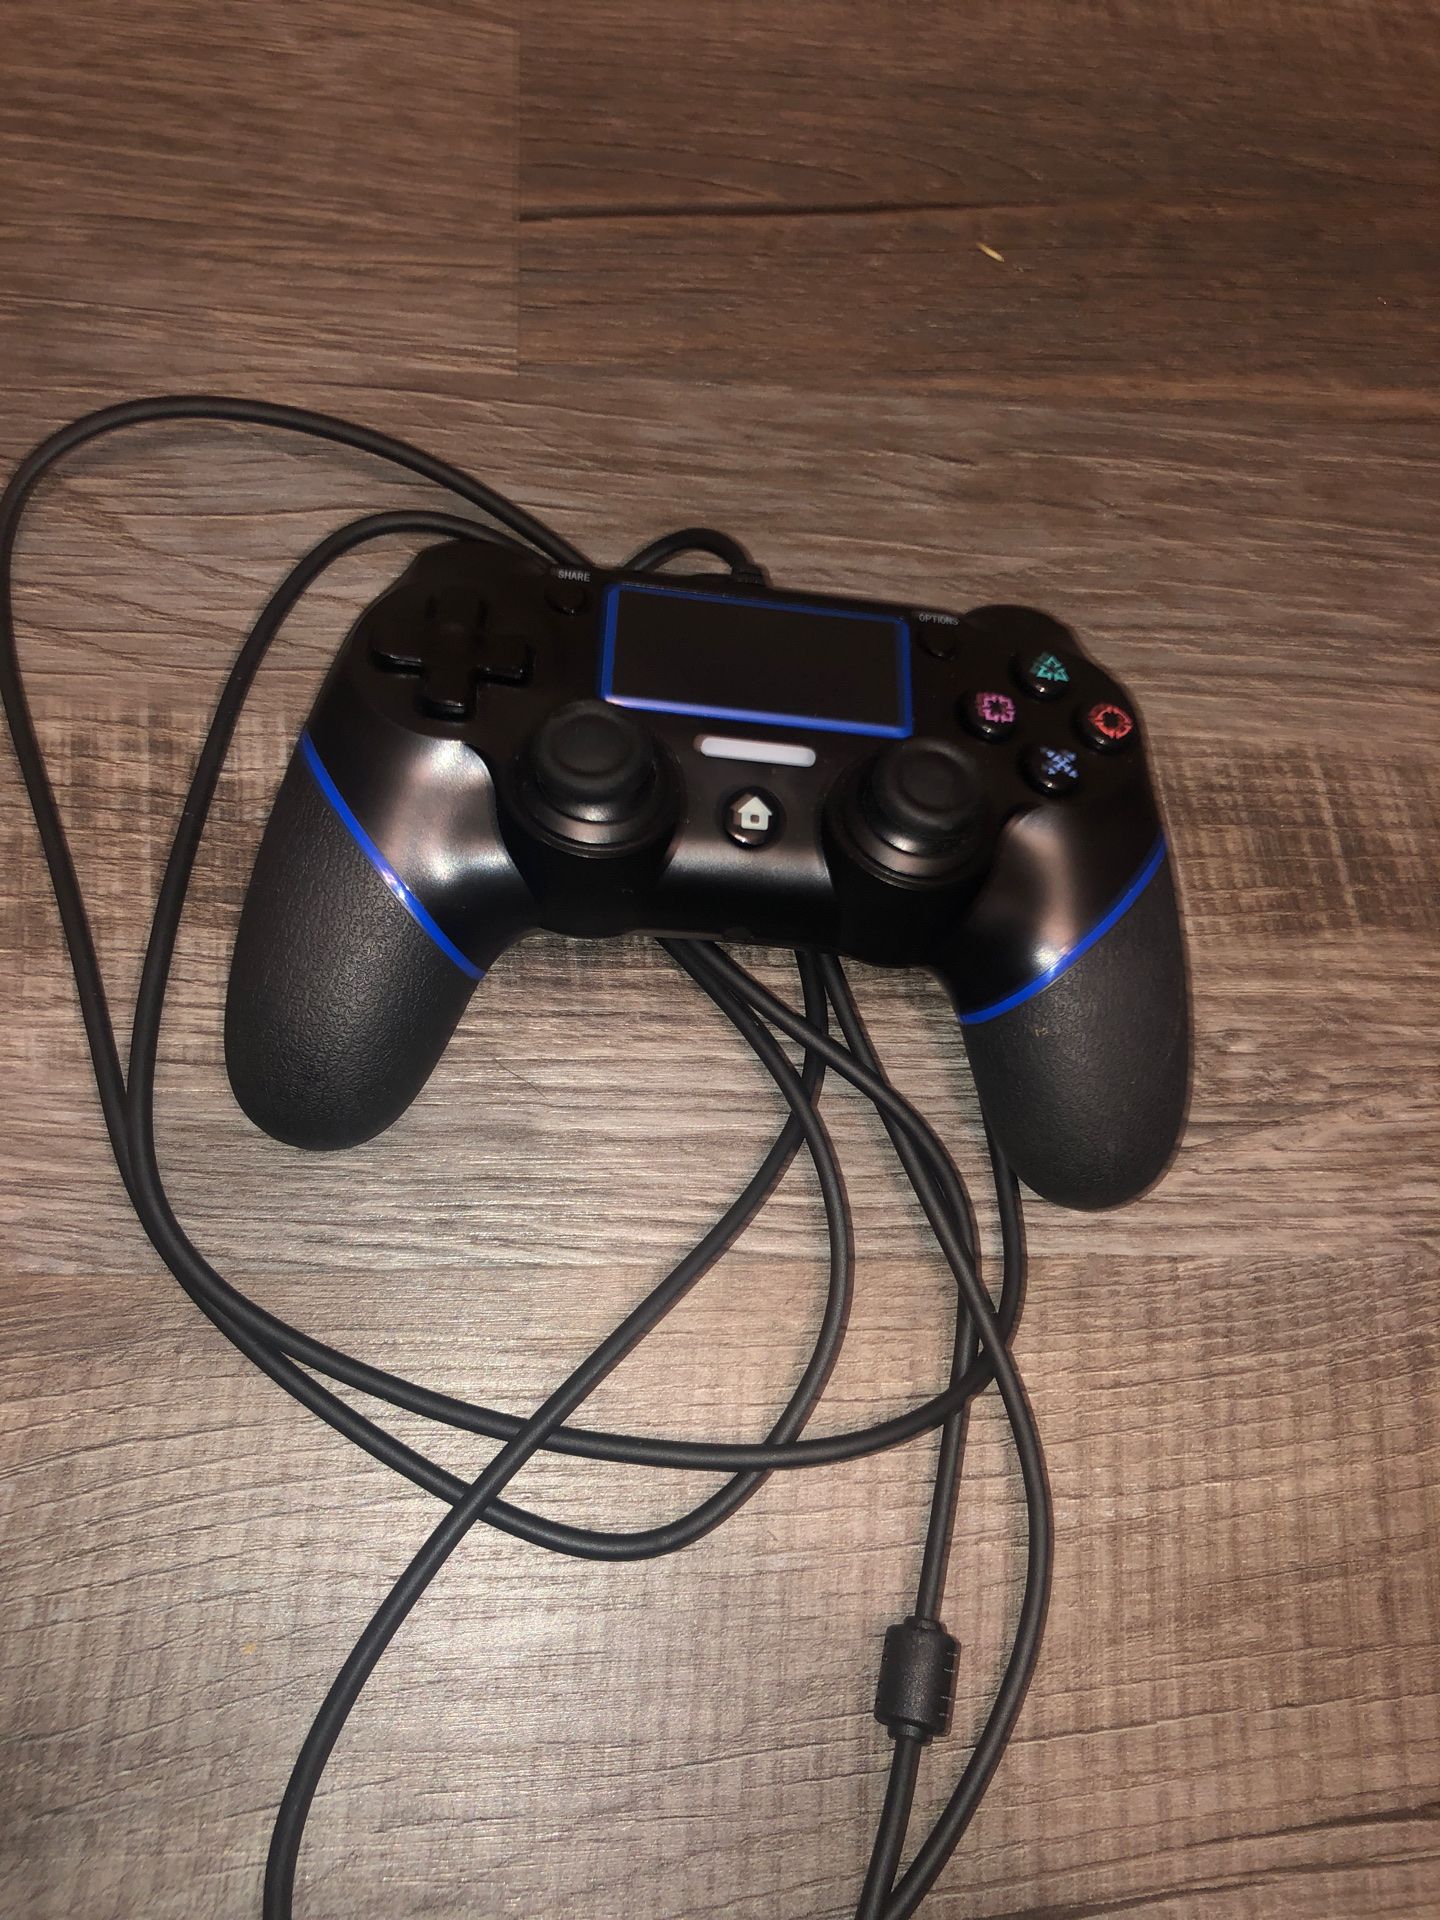 Wired Ps4 controller